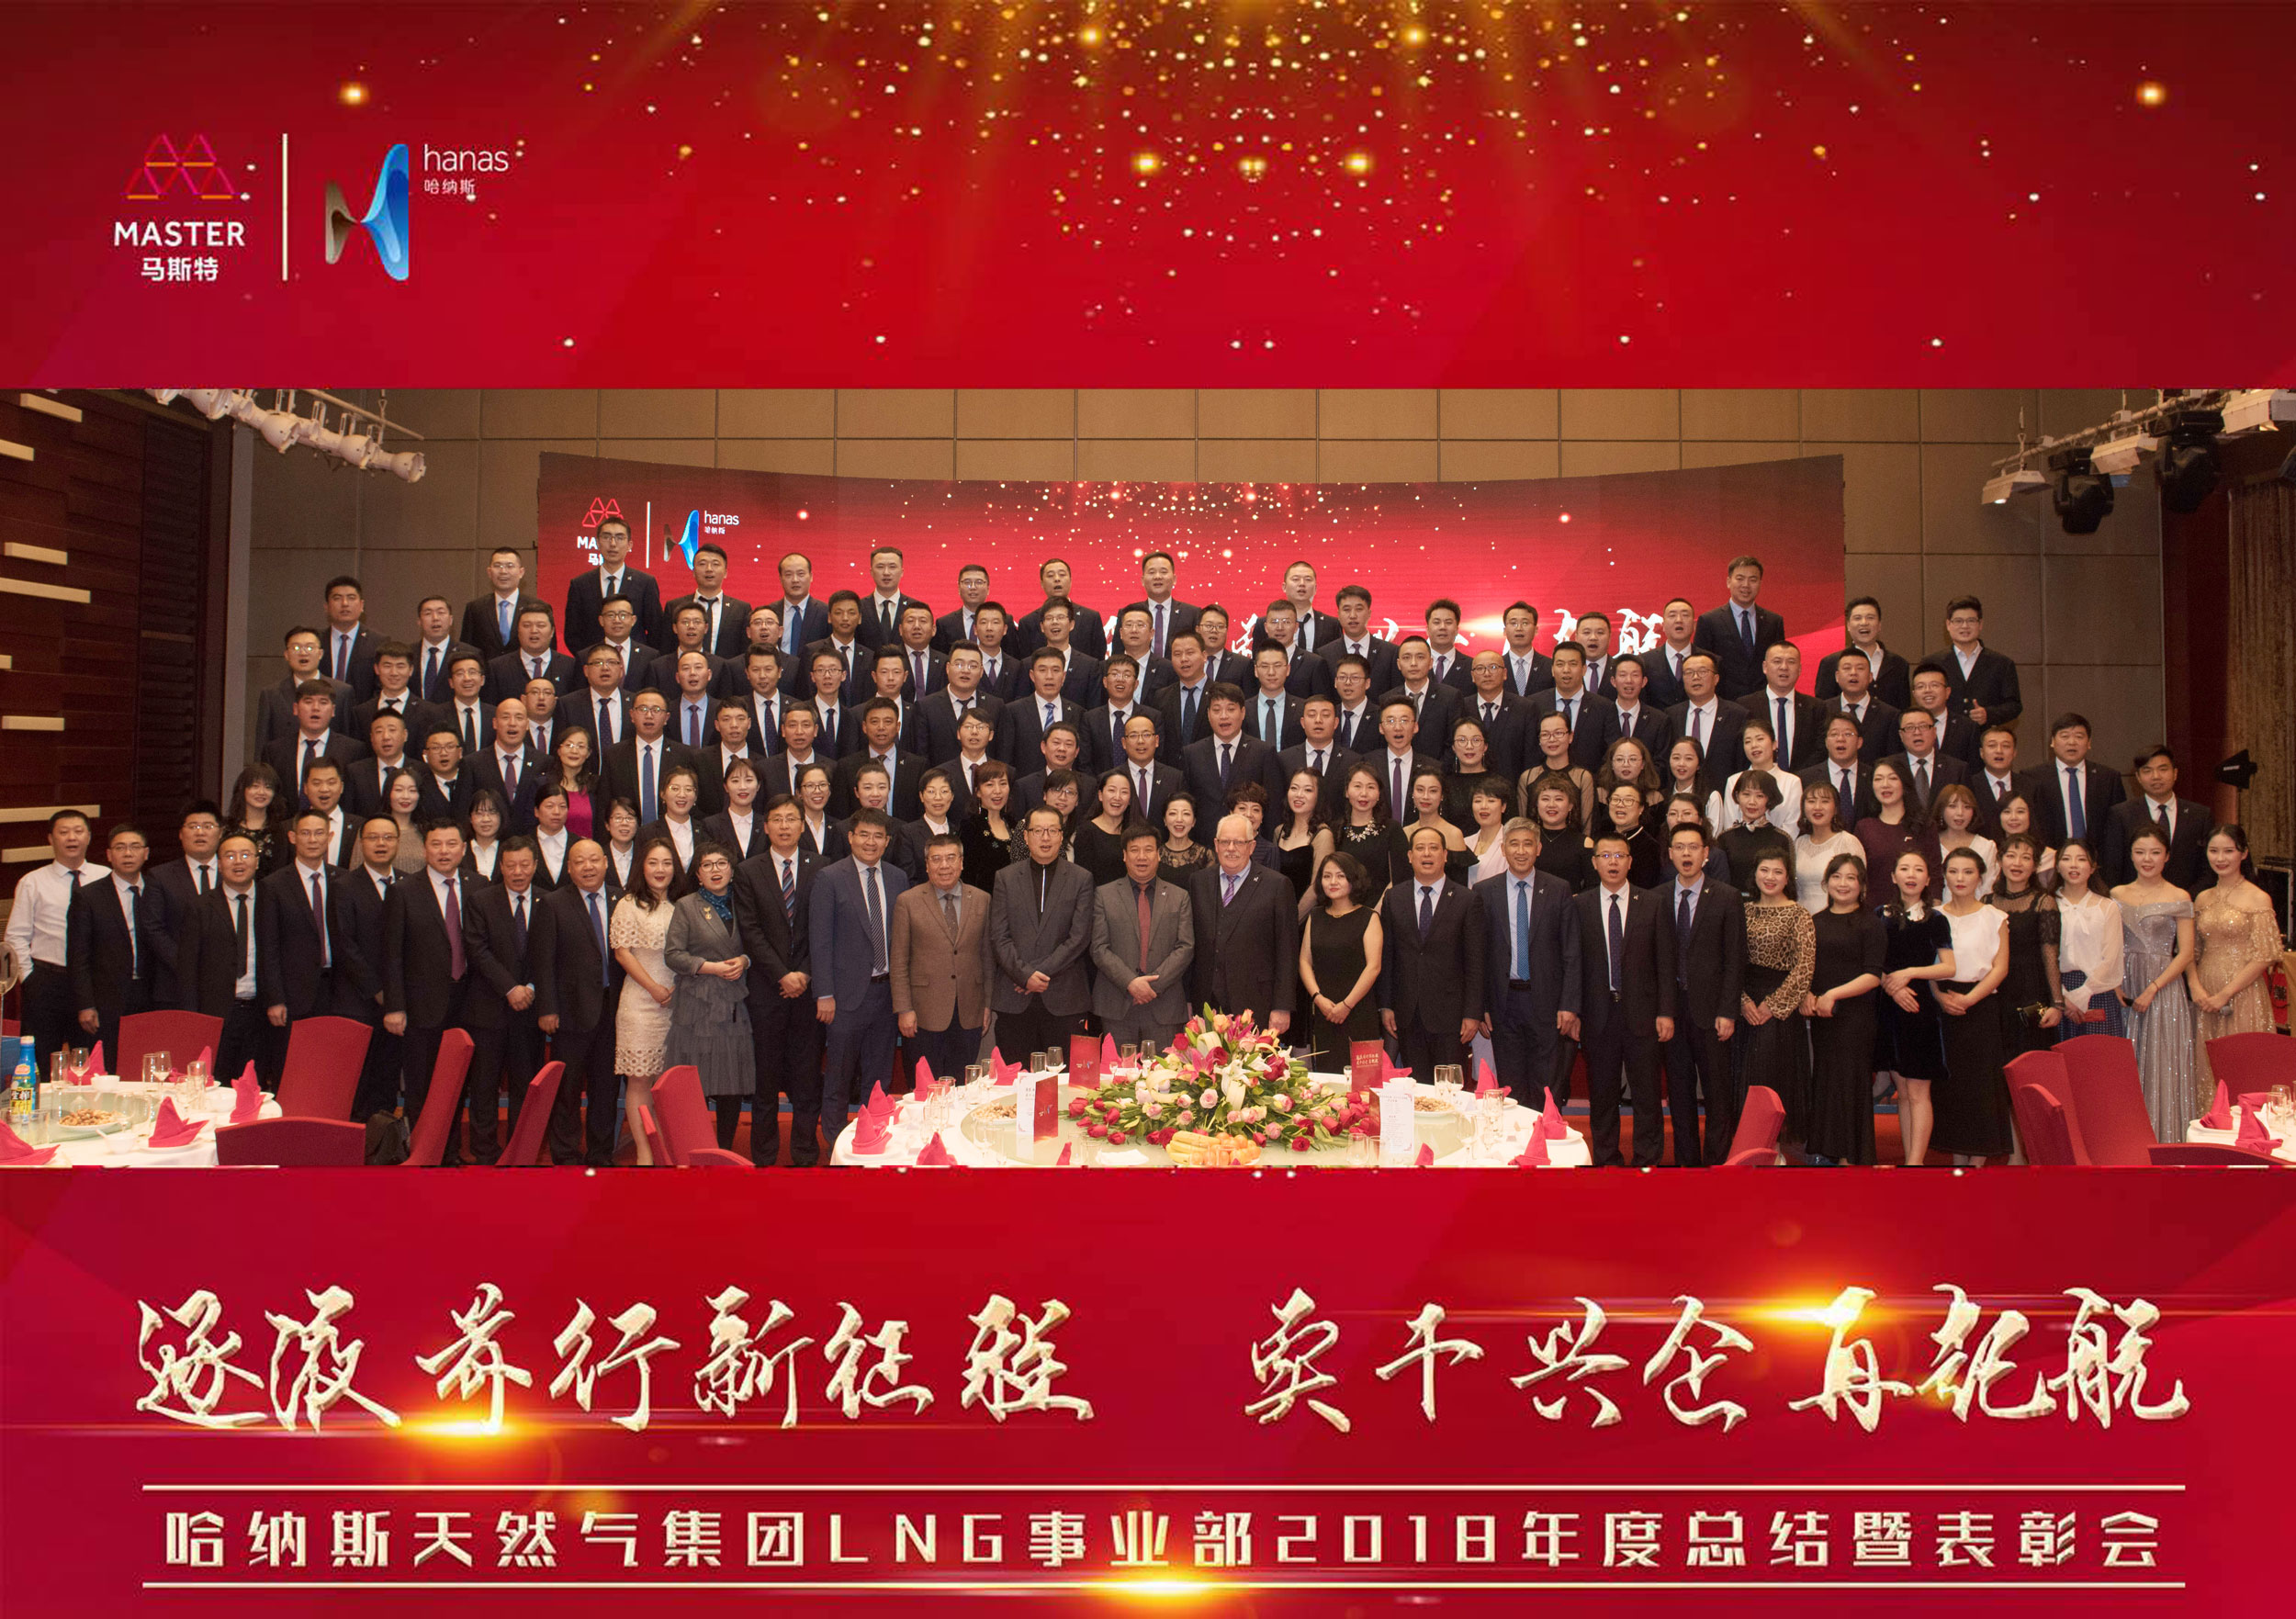 Ningxia Hanas Gas Group LNG Business Unit 2018 Annual Work Summary and Commendation Conference was held in Yinchuan